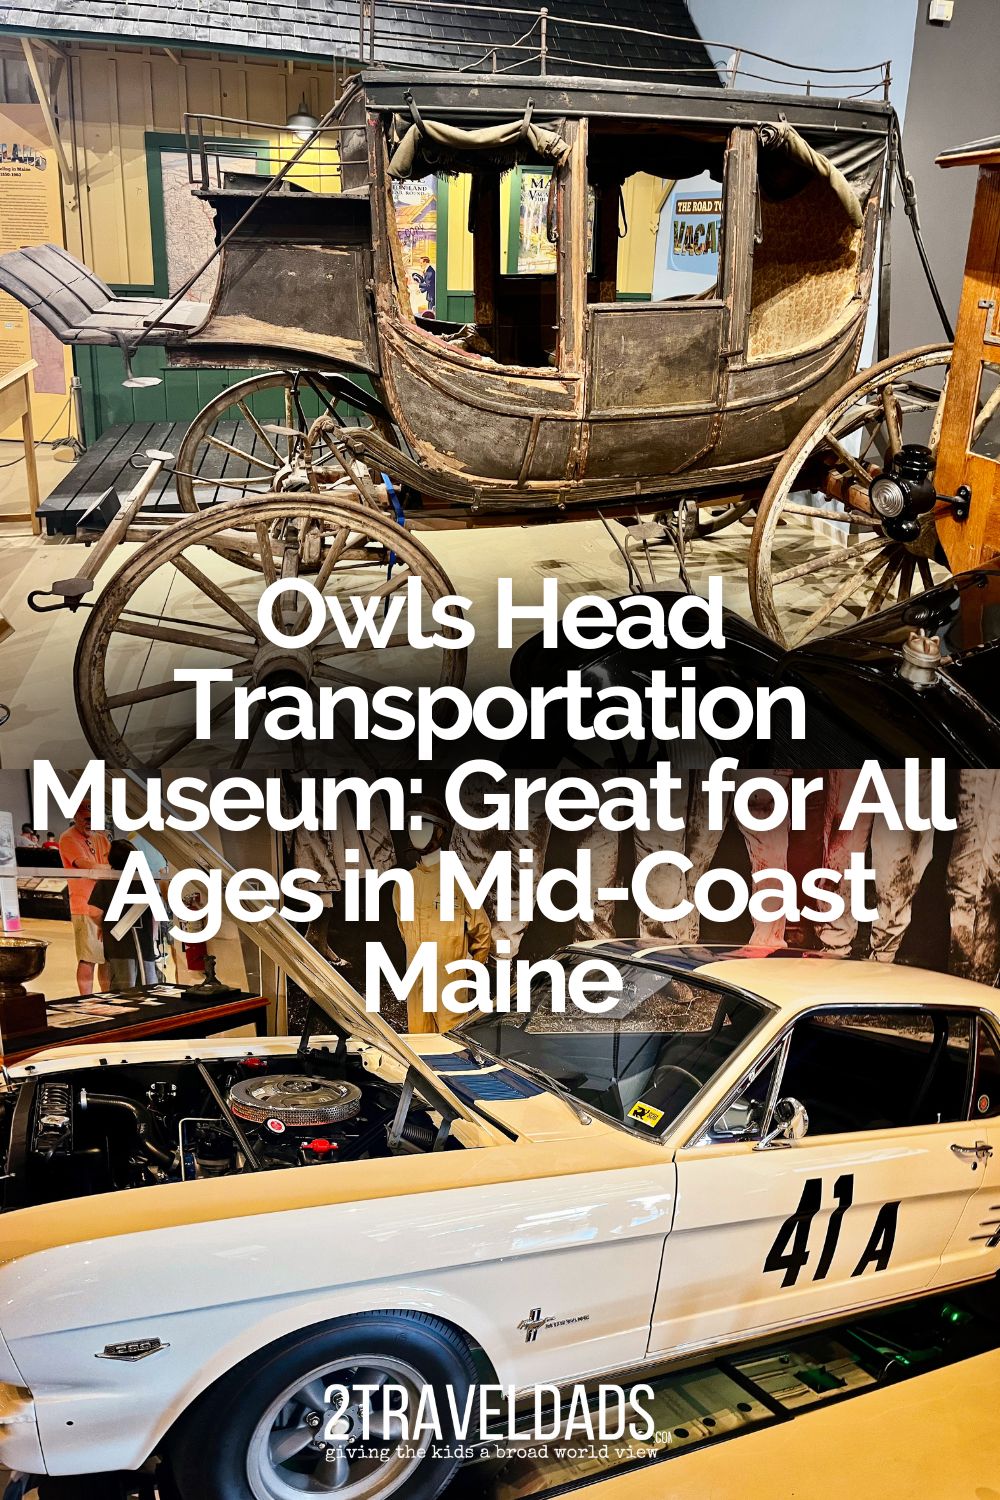 The Owls Head Transportation Museum is a great stop near Rockland on a Maine road trip. From vintage cars to bicycle history, Owls Head has fascinating exhibits for all ages.